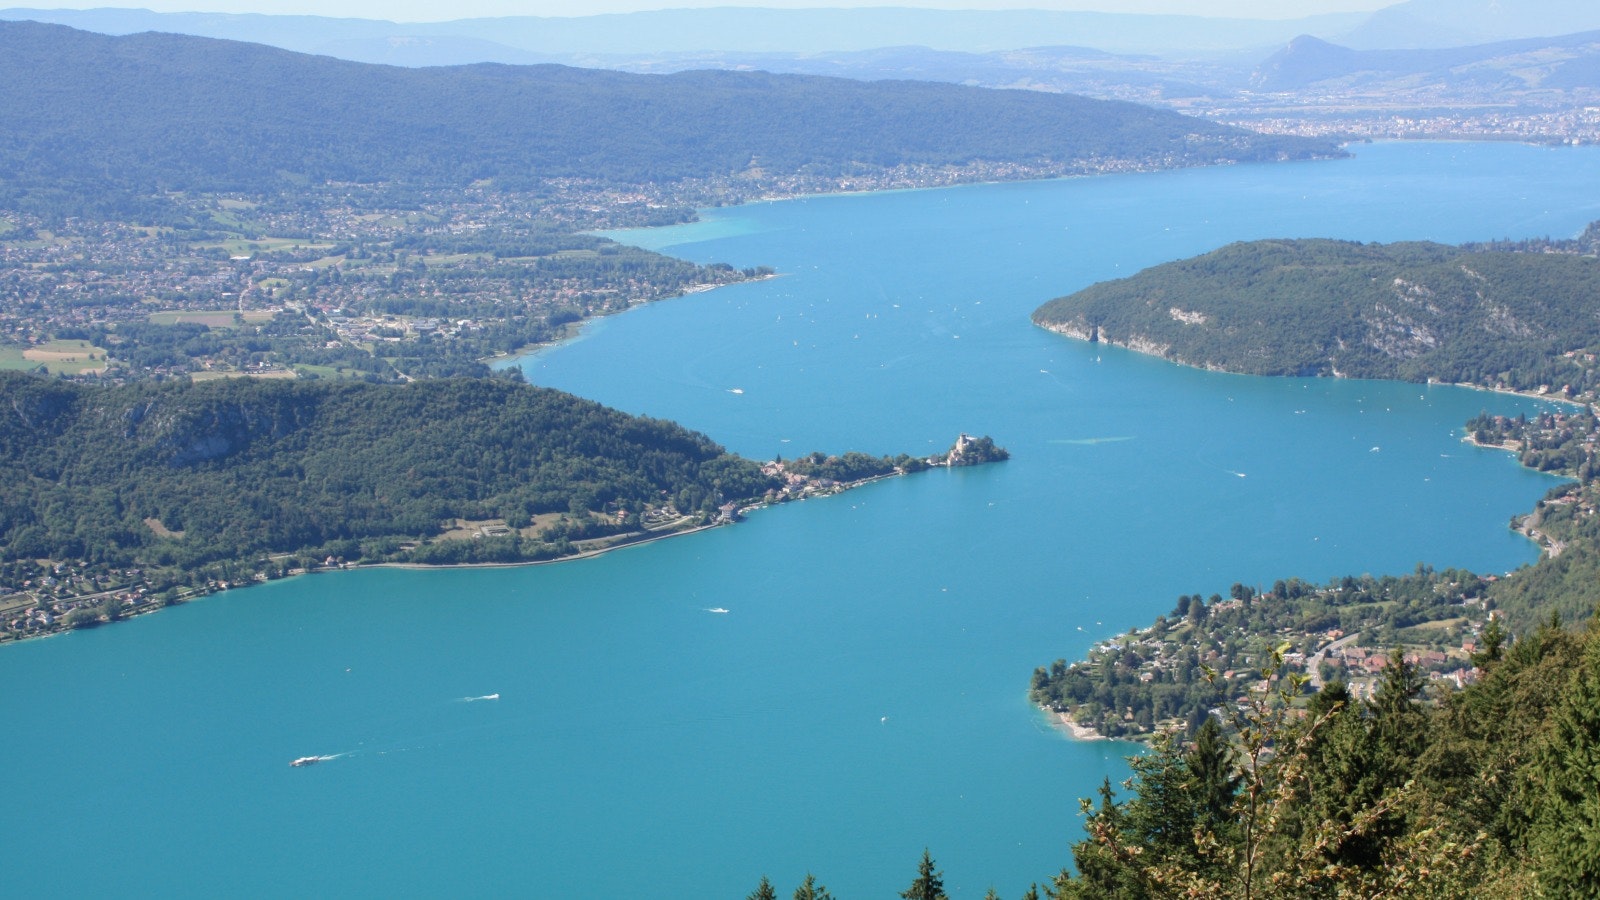 The view of Lake Annecy from Col de la Forclaz. Image © David Else / Lonely Planet